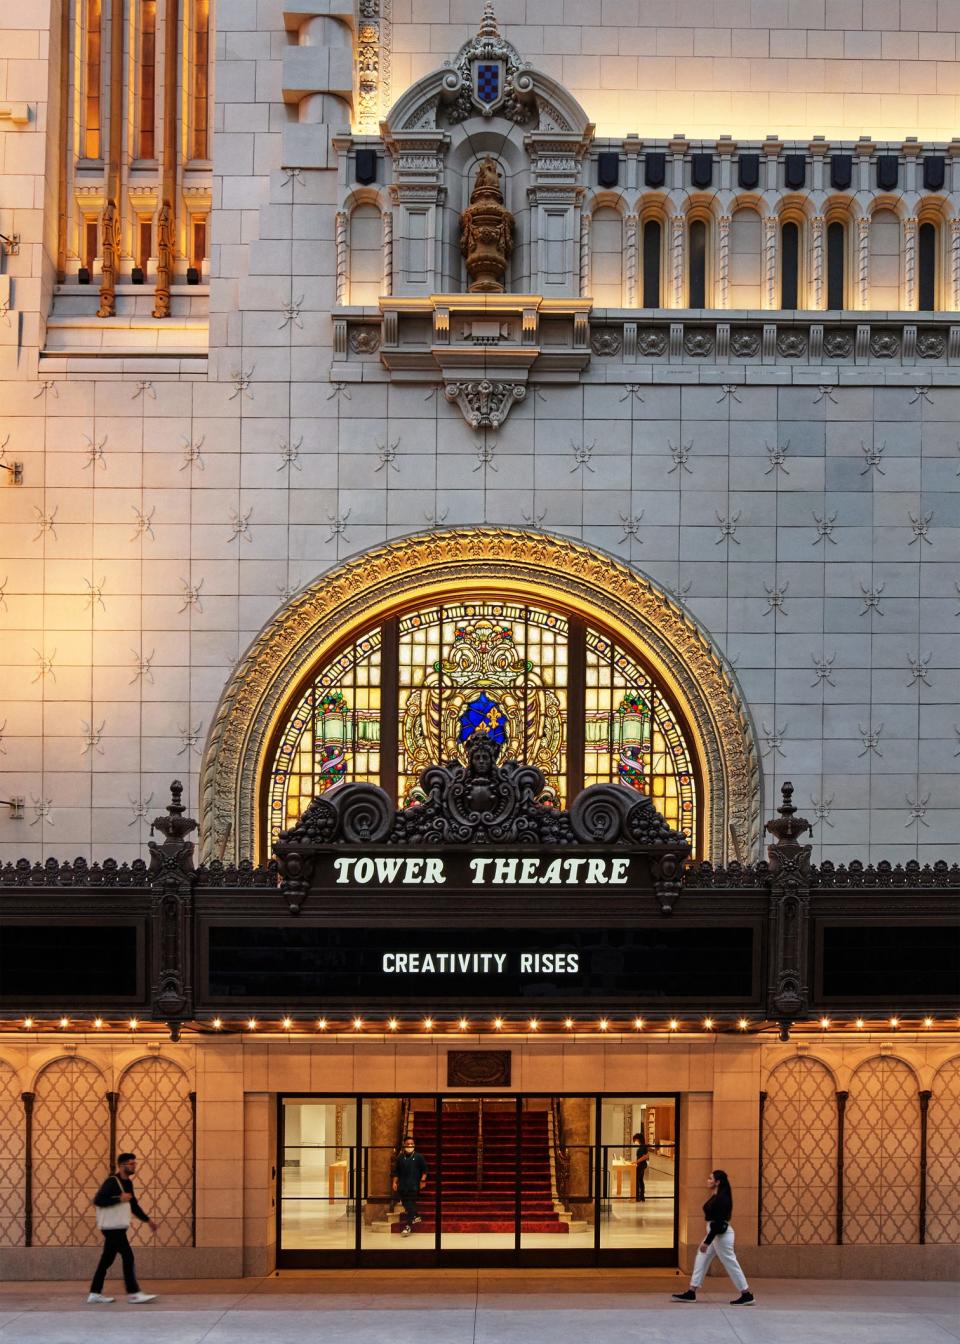 An exterior view of the Tower Theater Apple Store